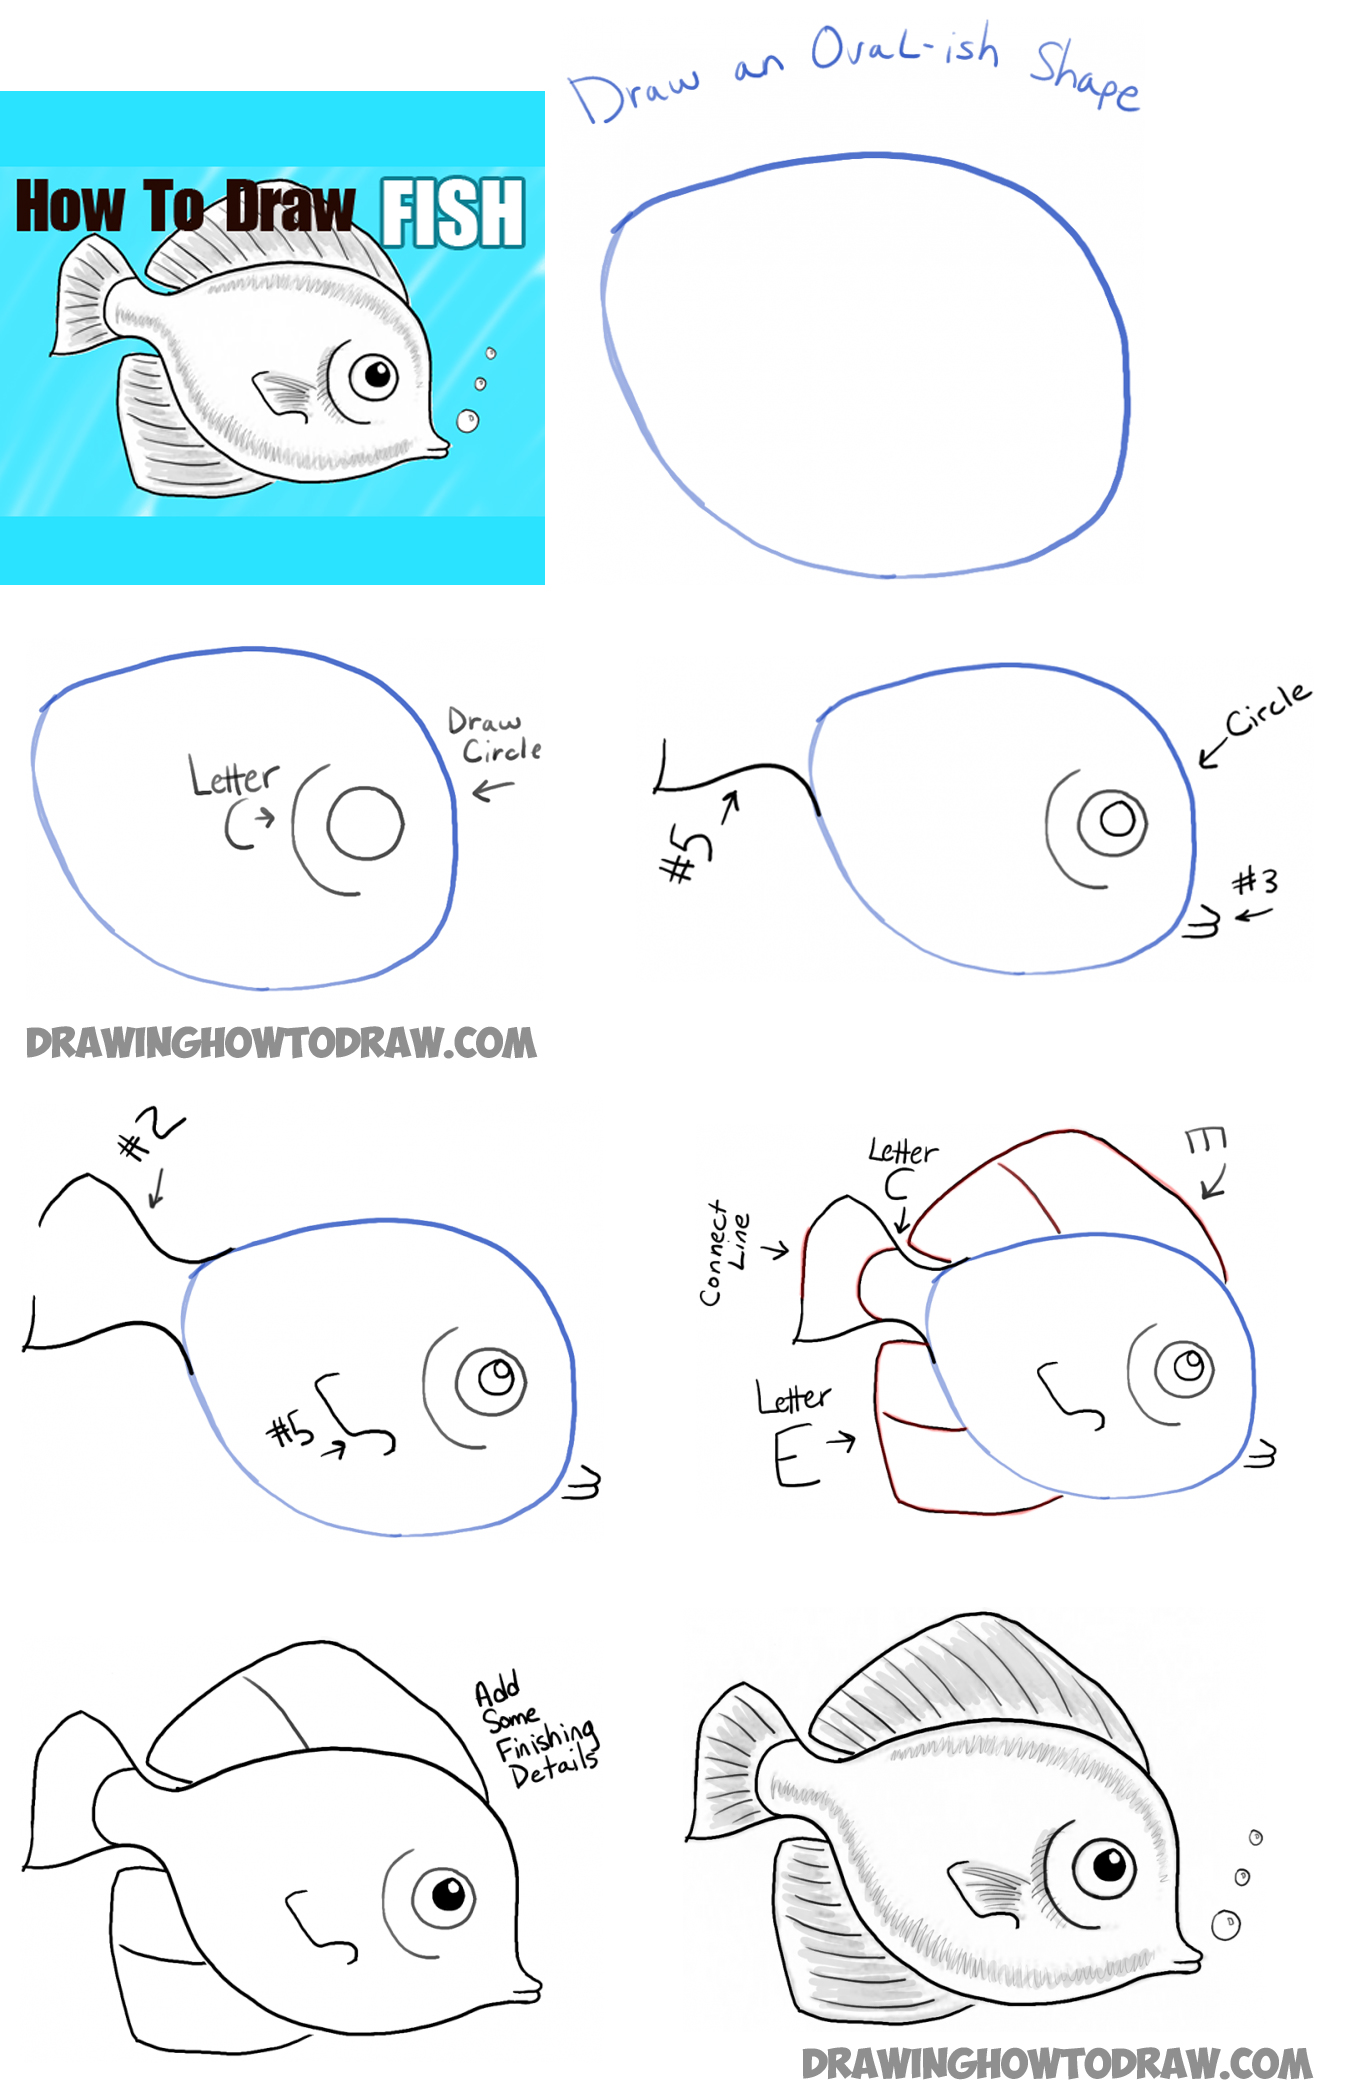 how to draw a fish step by step